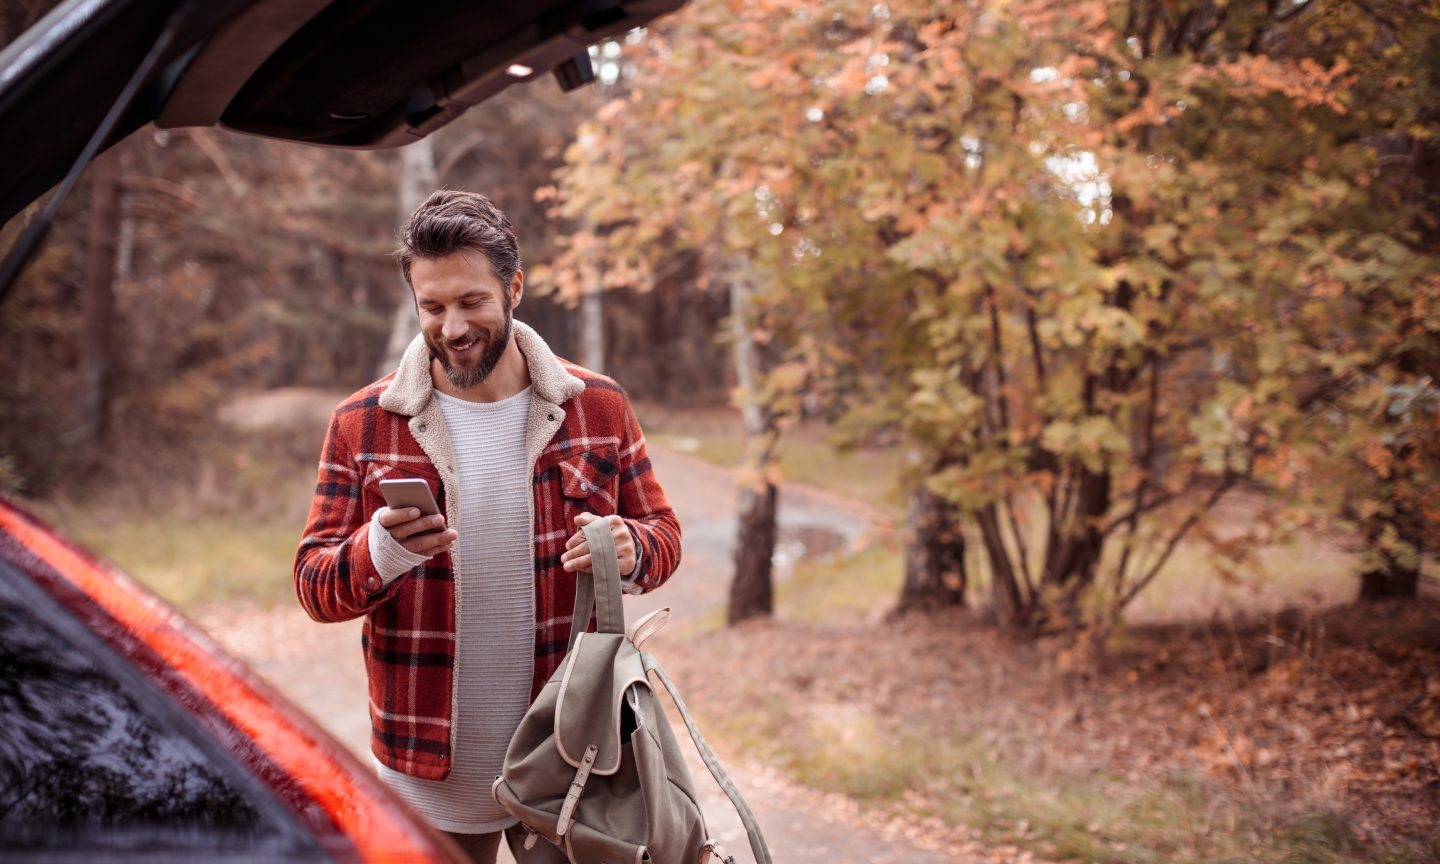 Nationwide Auto Insurance Review 2022: Pros and Cons - NerdWallet